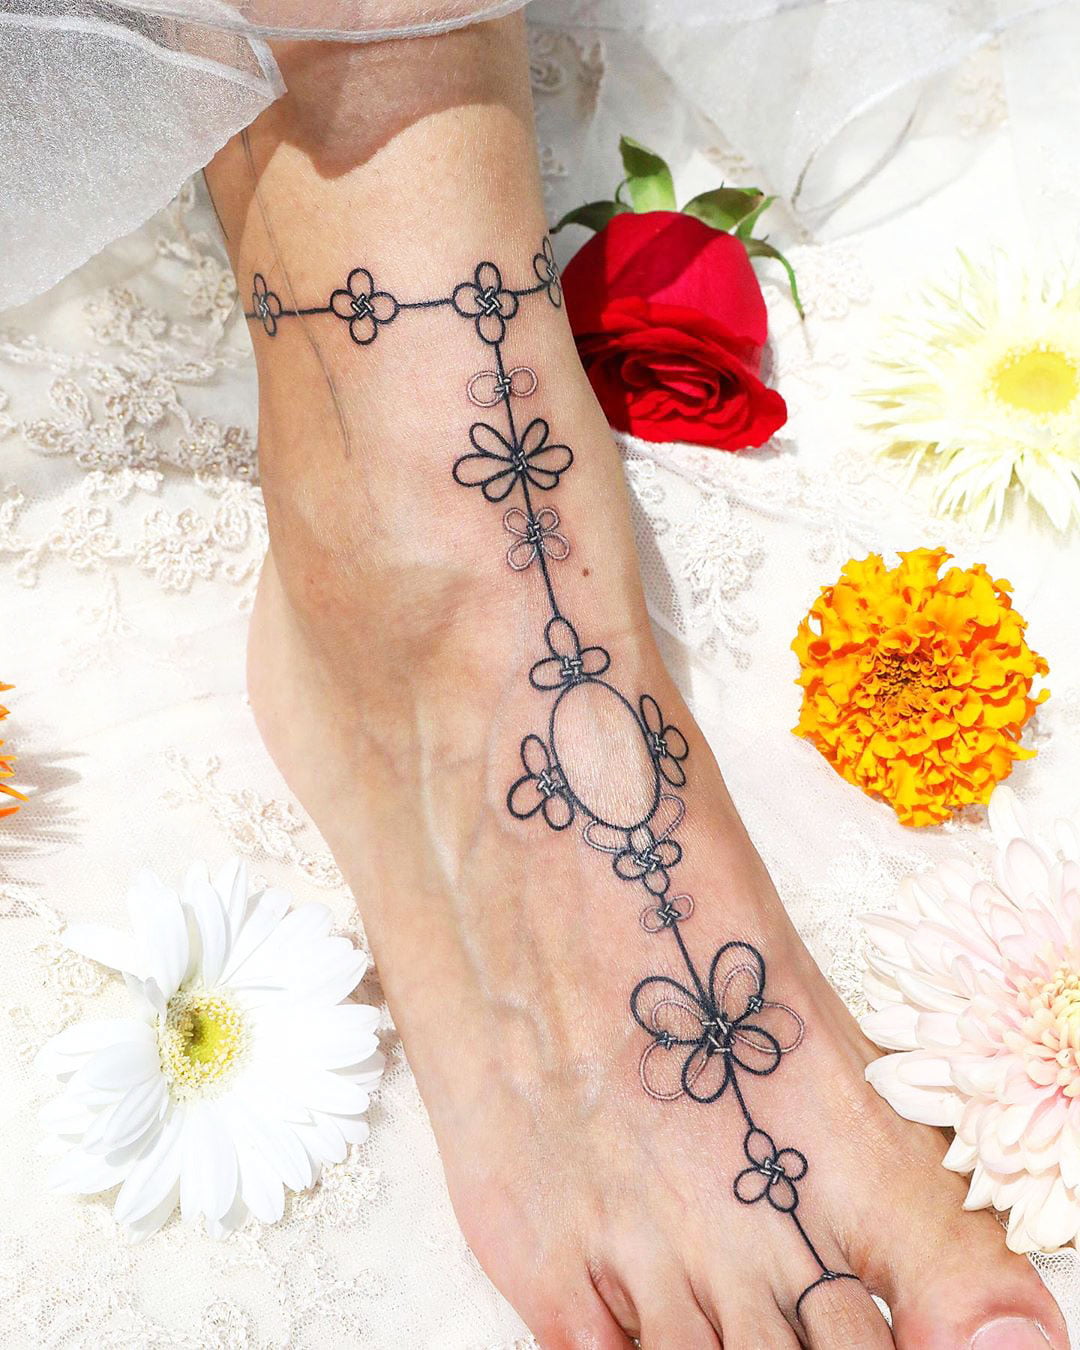 Meaningful Ankle Tattoos - Ankle Tattoo